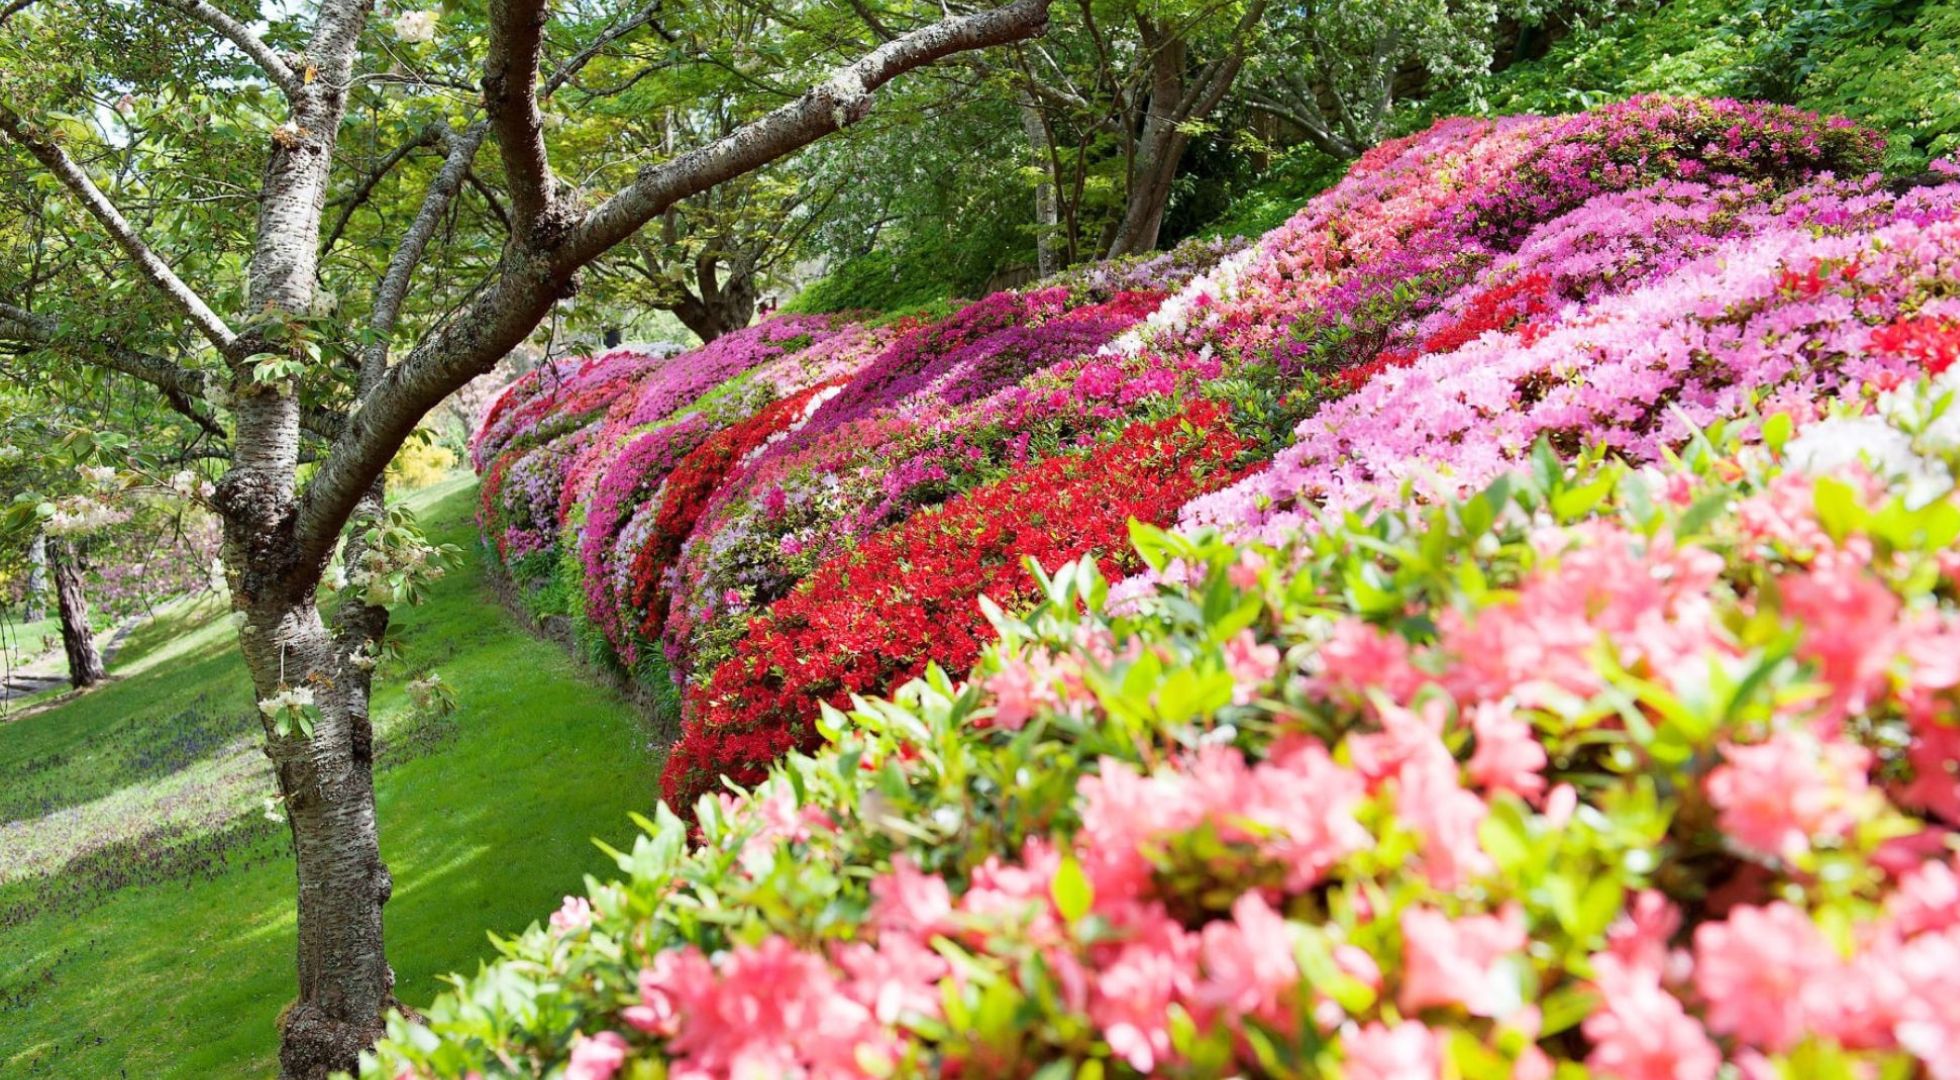 Spring blooms beautifully in Sydney